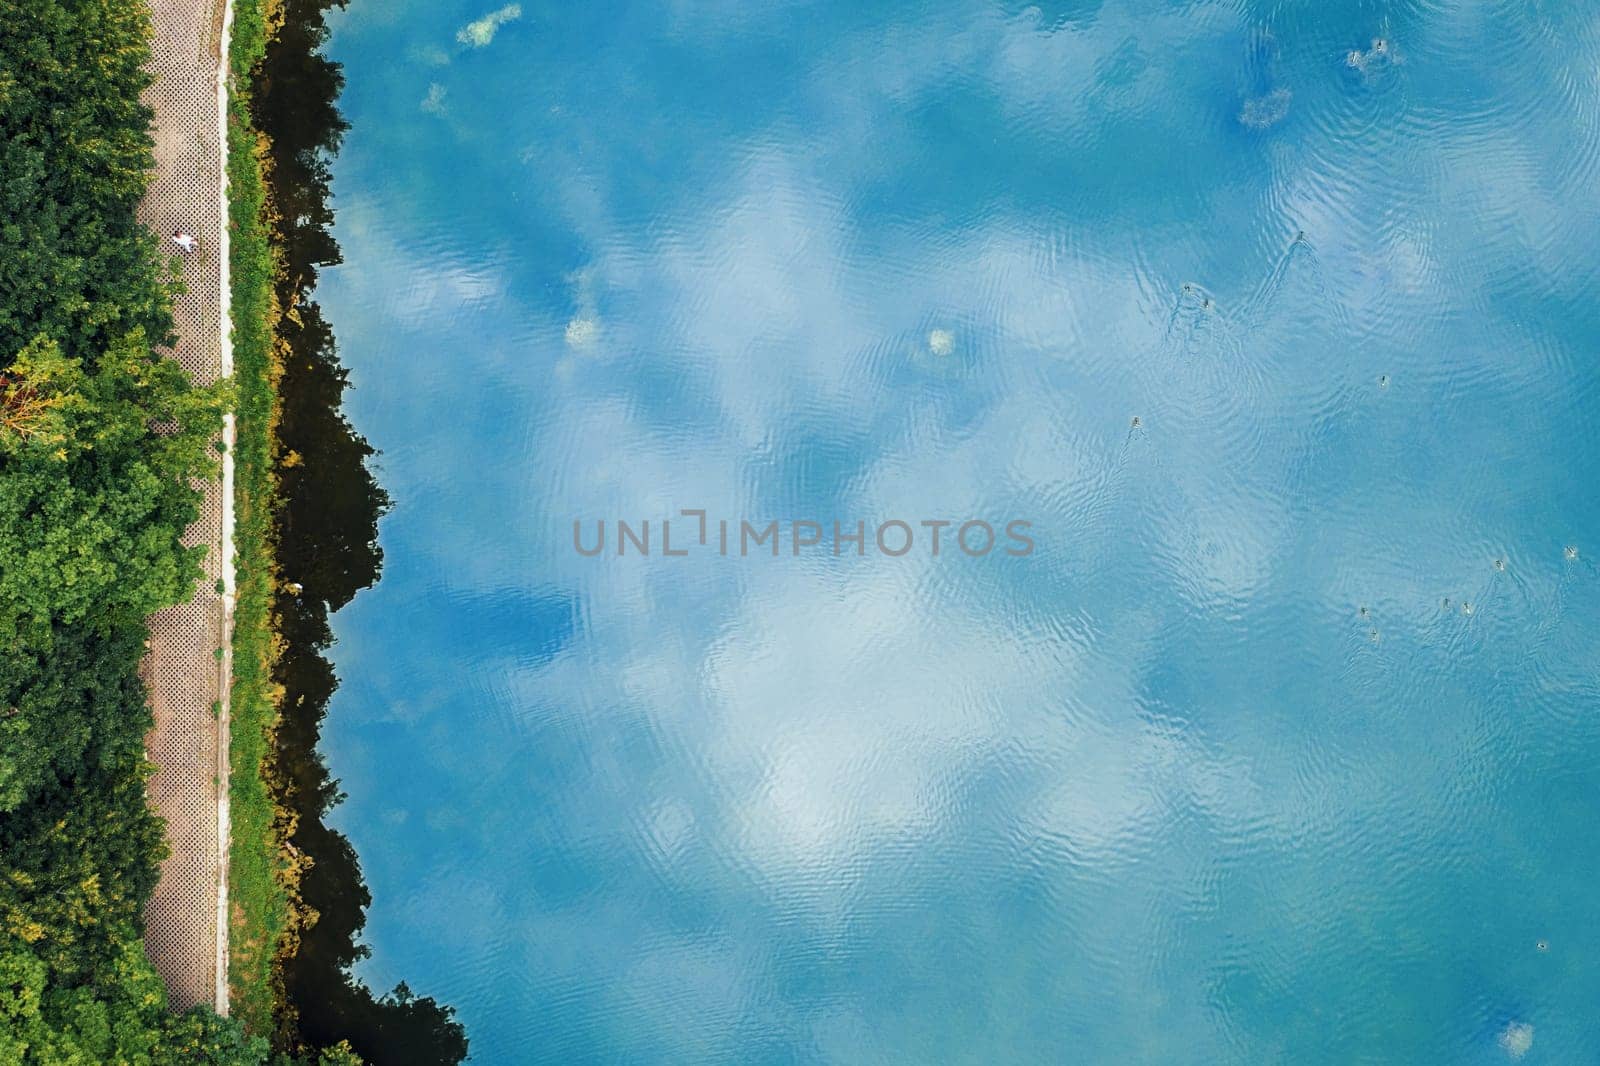 Blue water surface of lake with reflecting clouds, top view. Narrow strip of shore along lake and man walking along shore. Countryside woodland or park. Drone shoot above scenic landscape, coastline